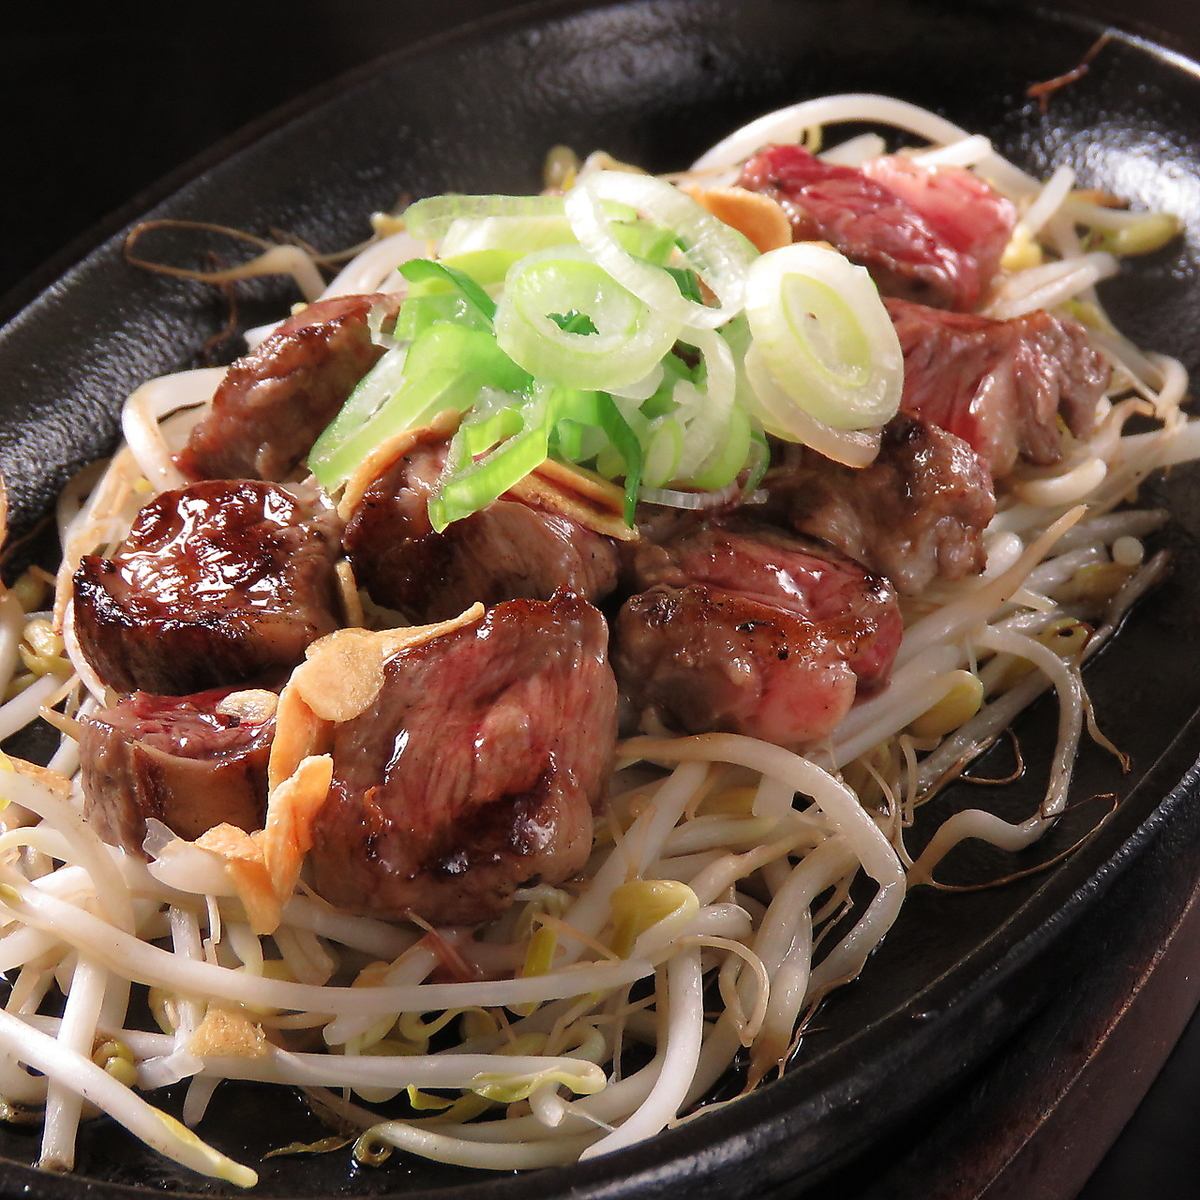 Thick juicy meat is responsive to eating ◎ We offer a single item at a reasonable price ♪